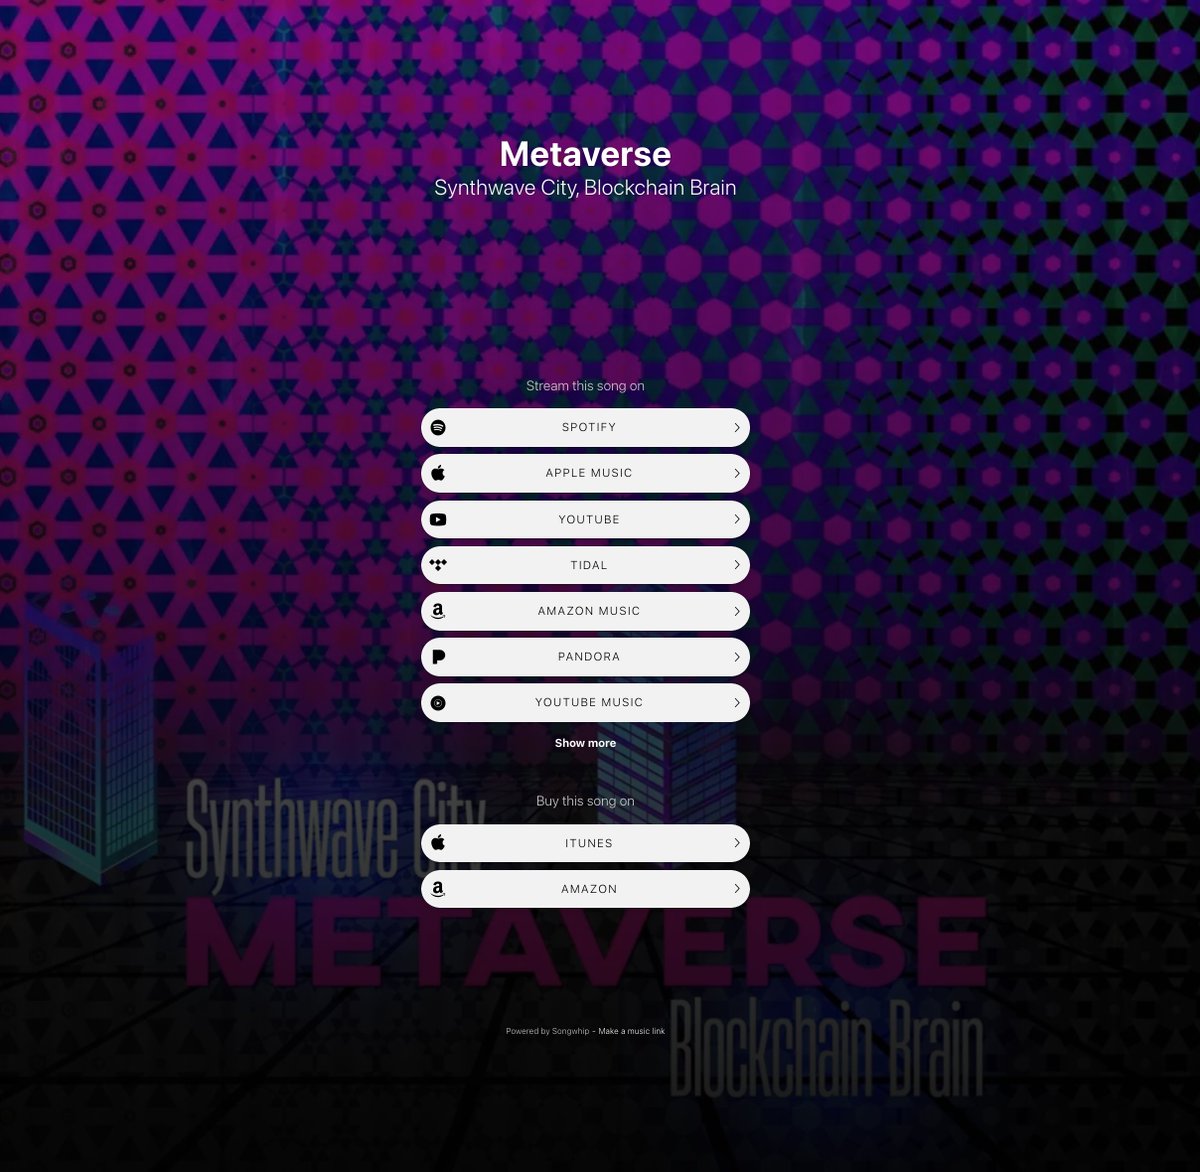 The latest single from our label: METAVERSE #metaverse by #SynthwaveCity and #Blockchain#Brain can be found here: songwhip.com/synthwave-city…